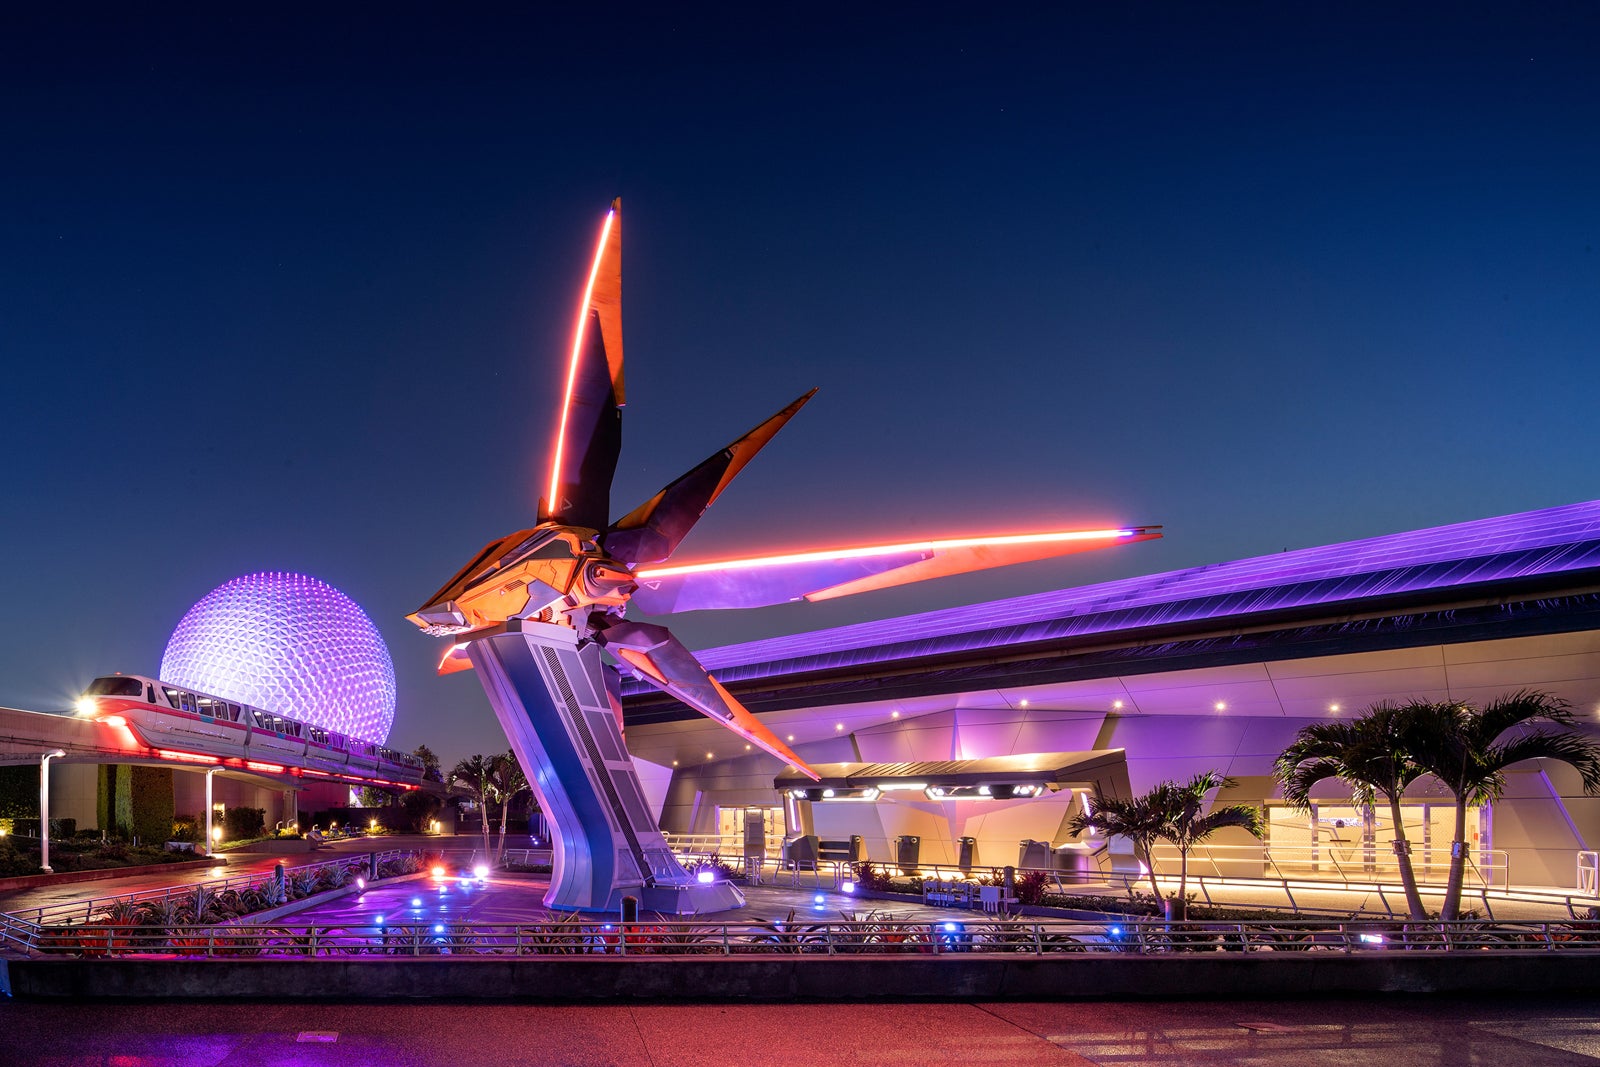 Guardians of the Galaxy: Cosmic Rewind at Epcot.